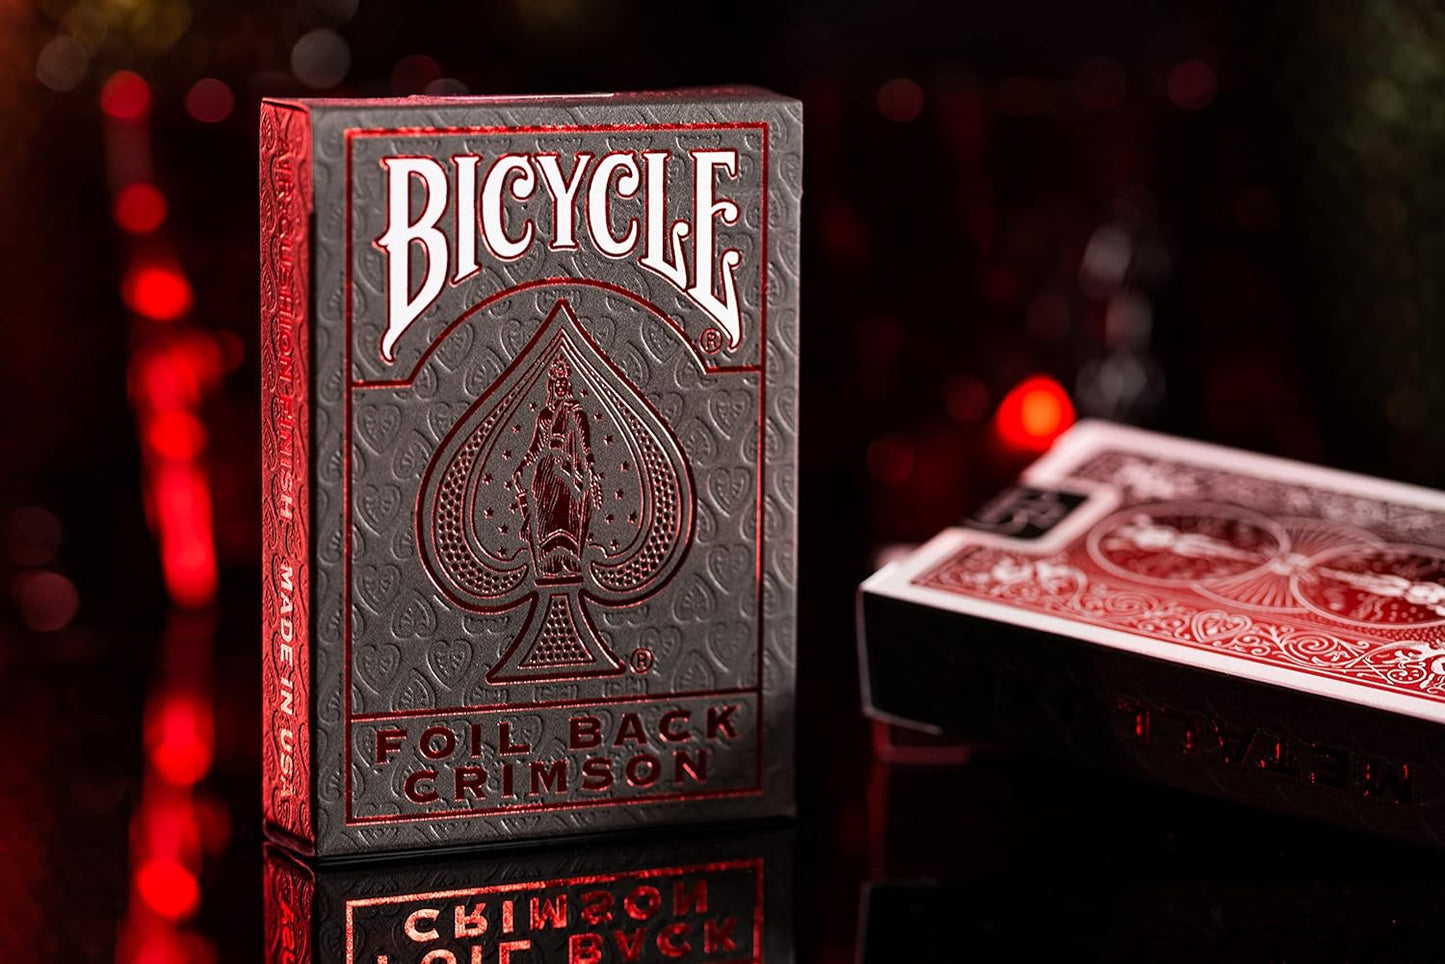 Metalluxe Red Playing Cards